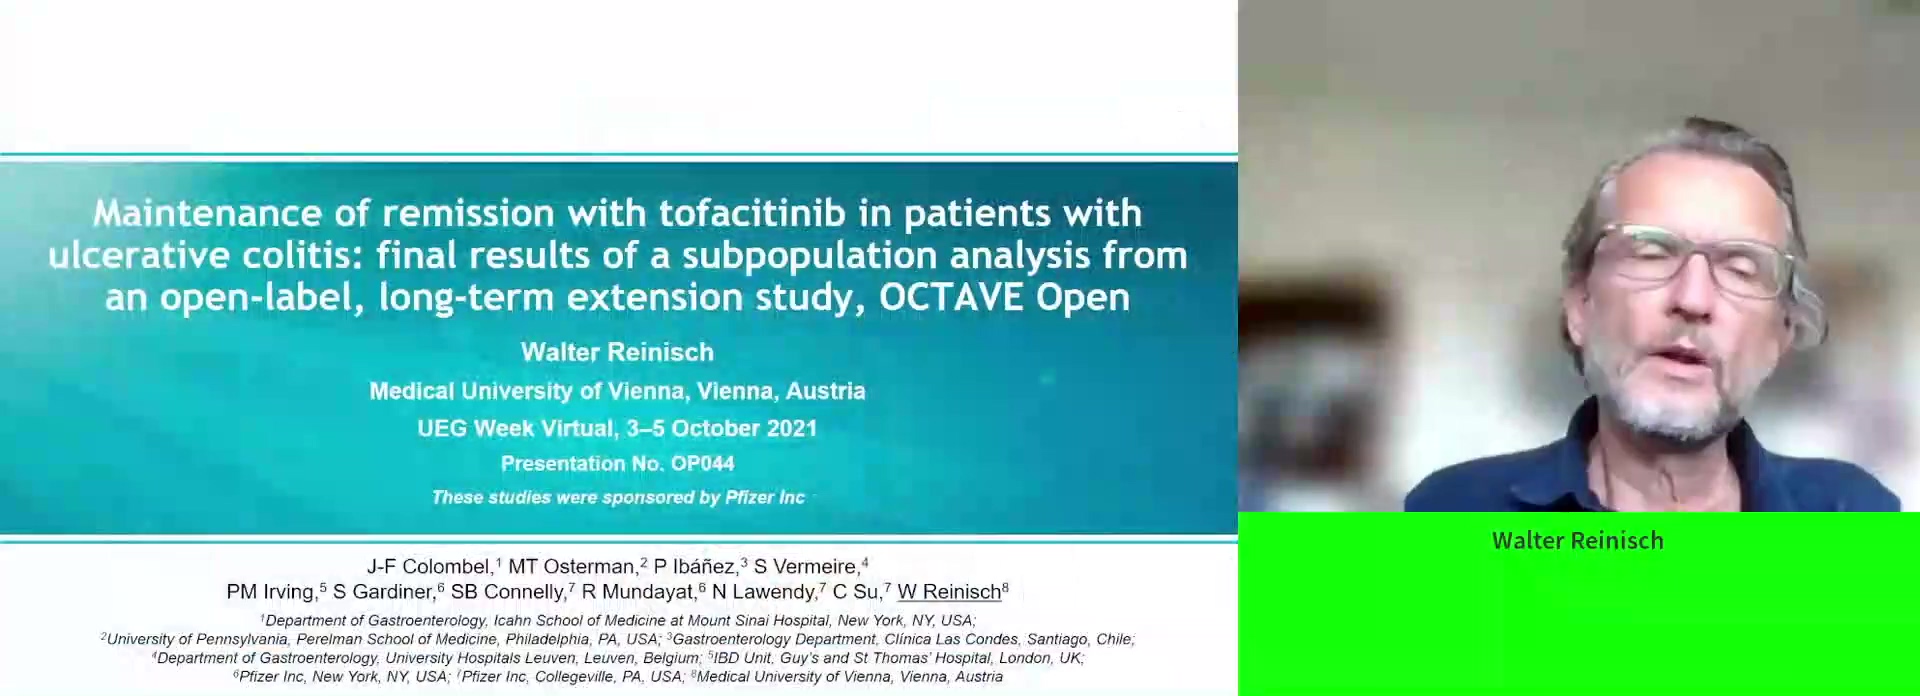 MAINTENANCE OF REMISSION WITH TOFACITINIB IN PATIENTS WITH ULCERATIVE COLITIS: FINAL RESULTS OF A SUBPOPULATION ANALYSIS FROM AN OPEN-LABEL, LONG-TERM EXTENSION STUDY, OCTAVE OPEN